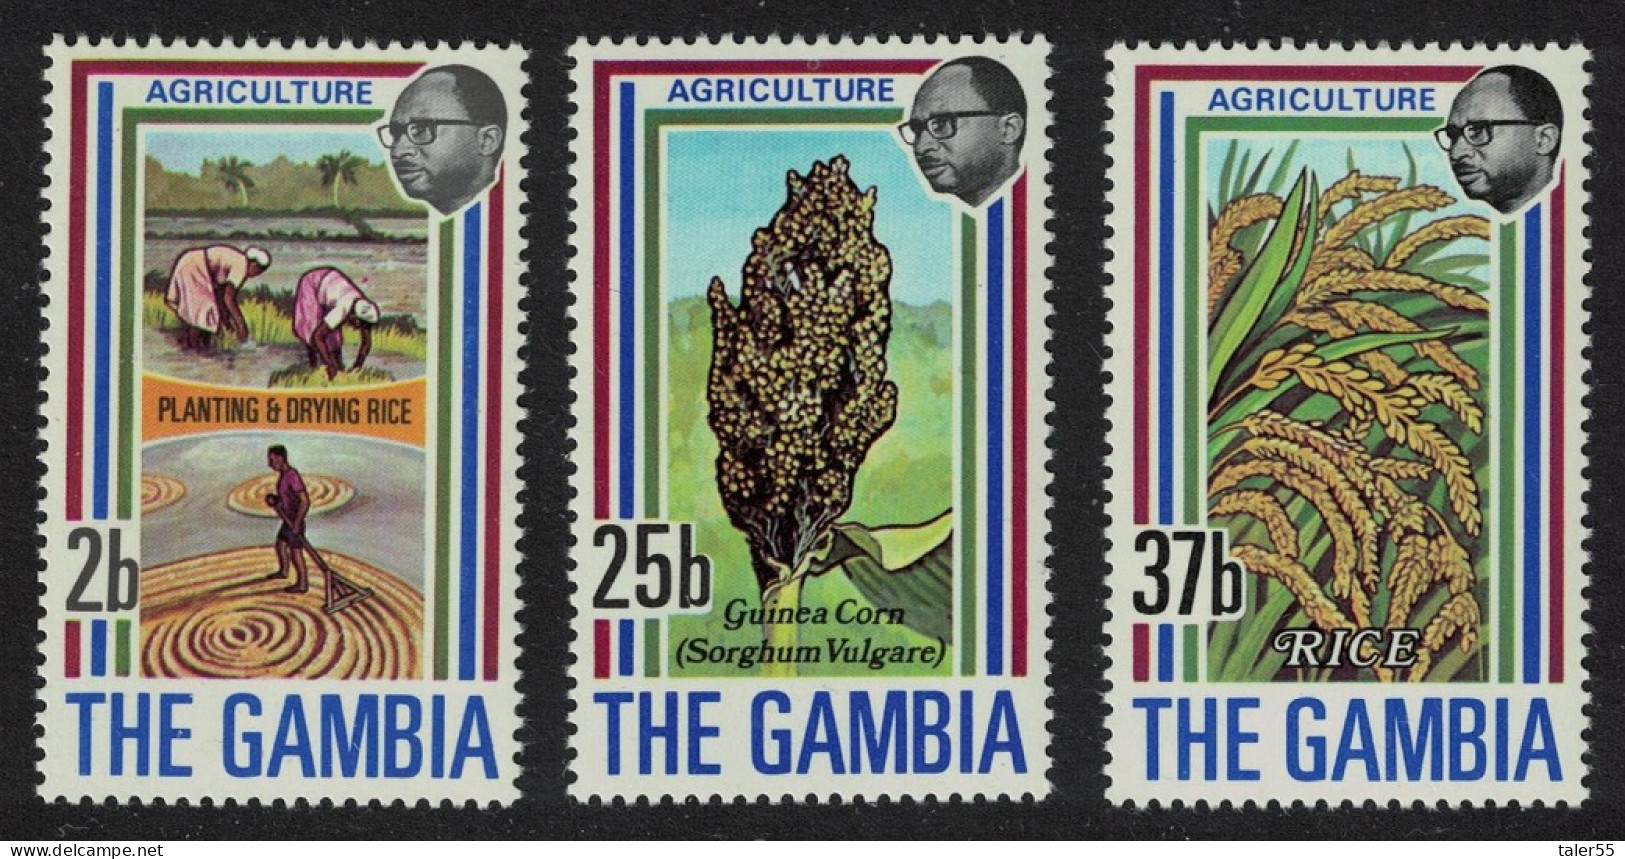 Gambia Agriculture 1st Series 3v 1973 MNH SG#301-303 - Gambia (1965-...)